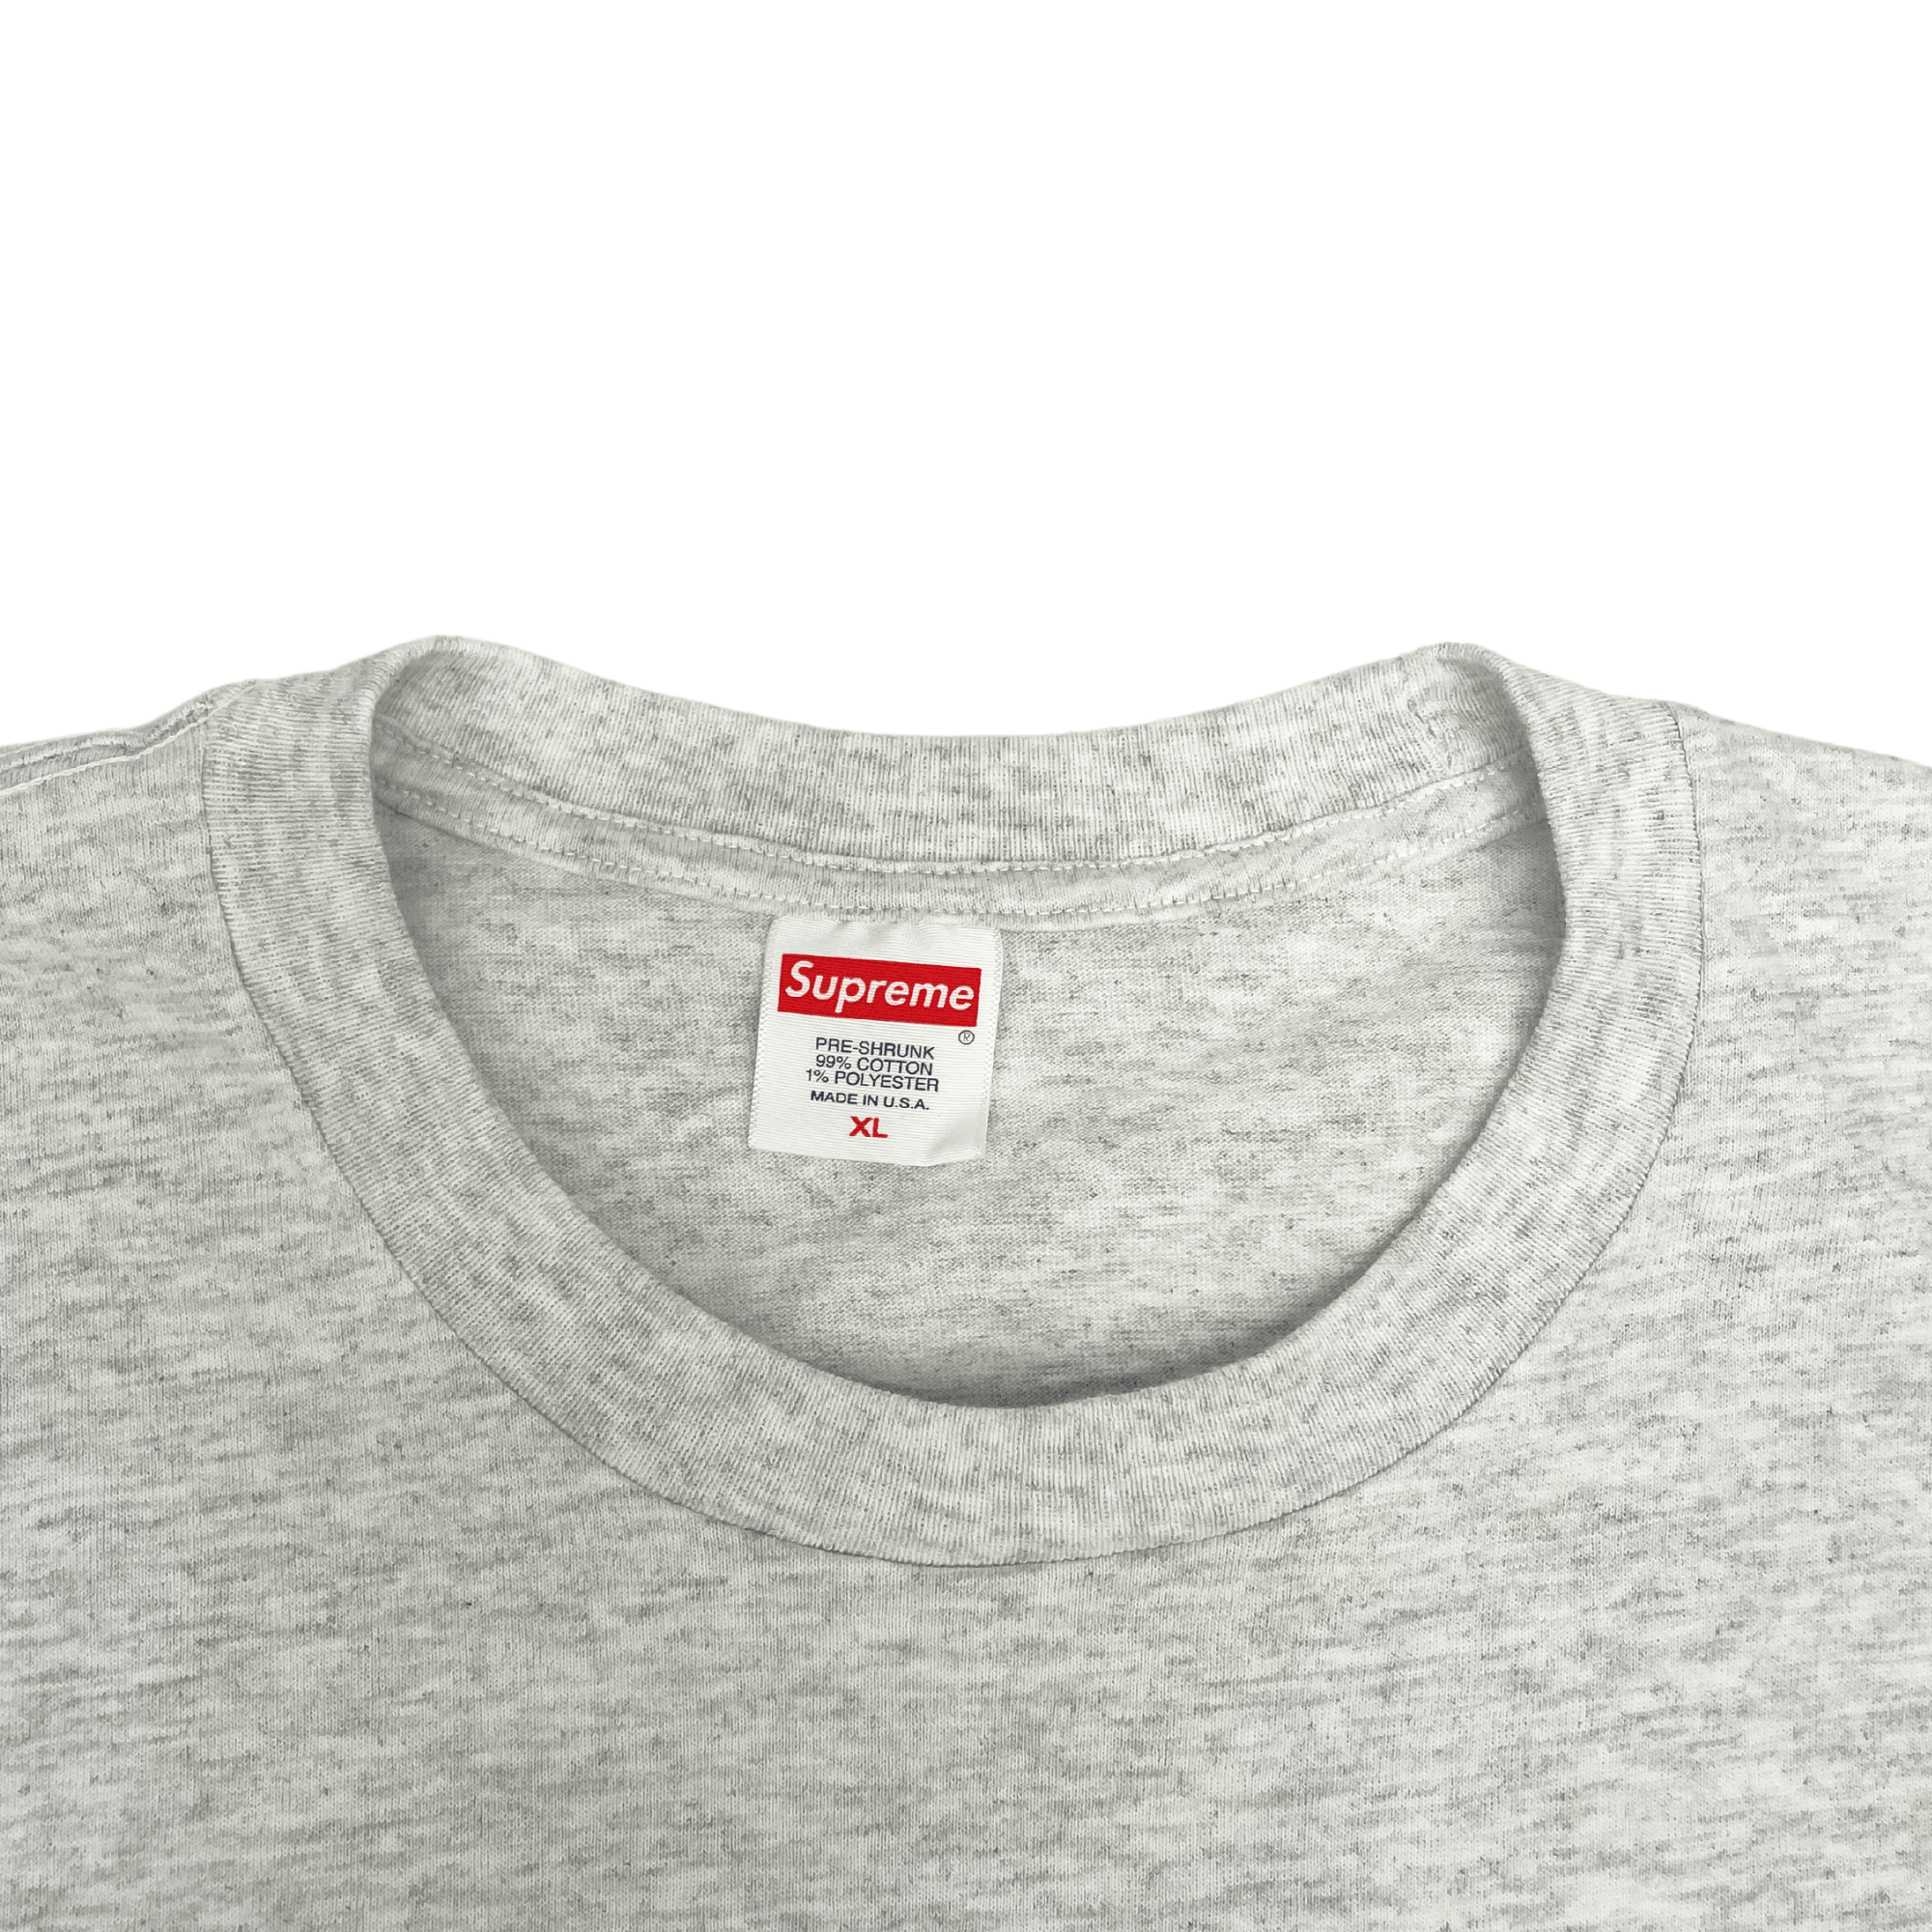 Supreme T-Shirt - Men's XL - Fashionably Yours